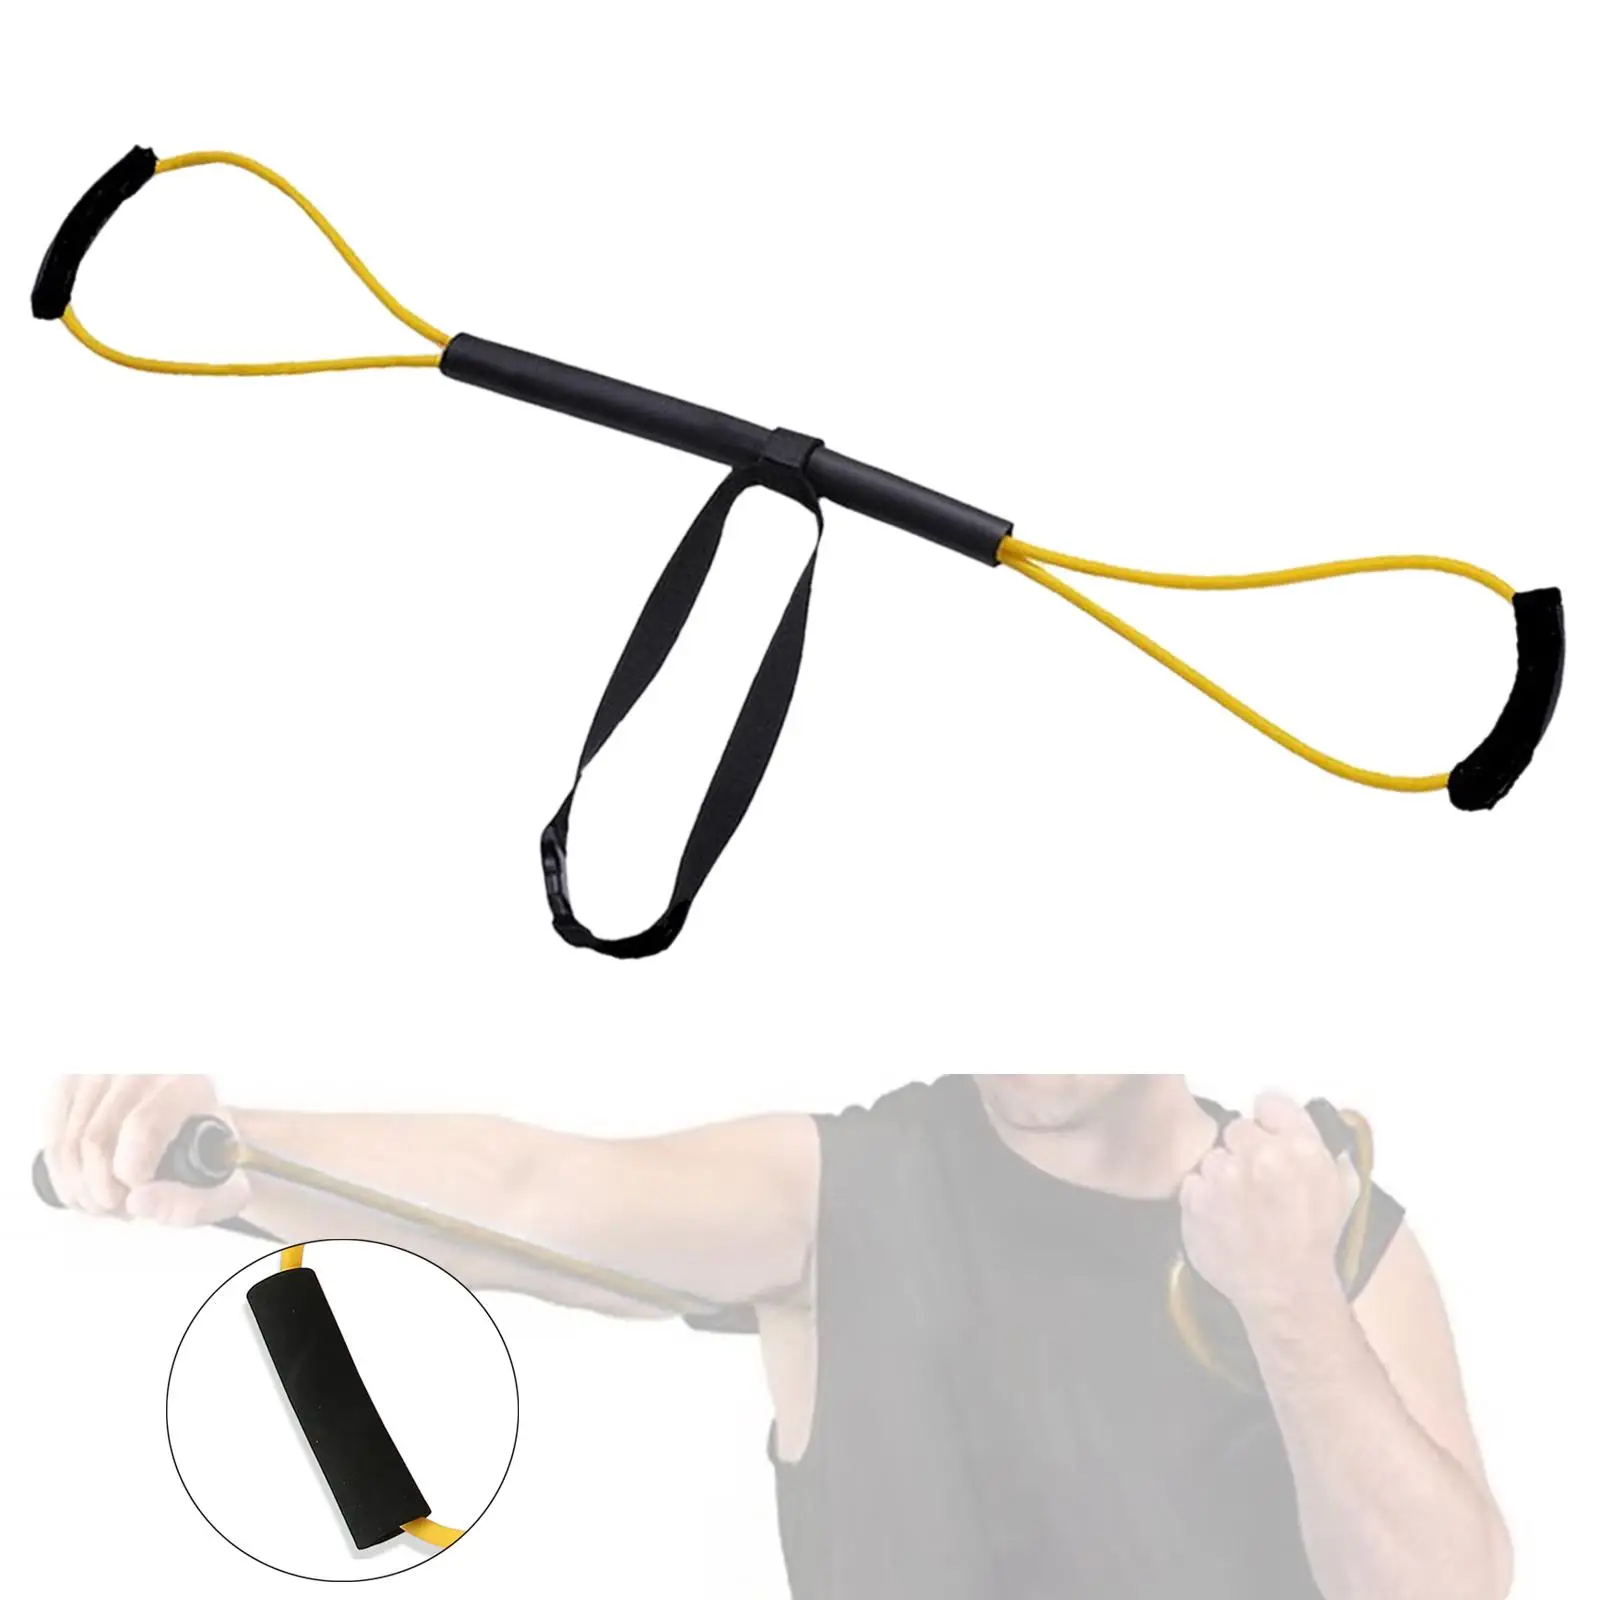 Exercise Bands Boxing Bands Pulling Rope Punching Equipment Boxing Equipment